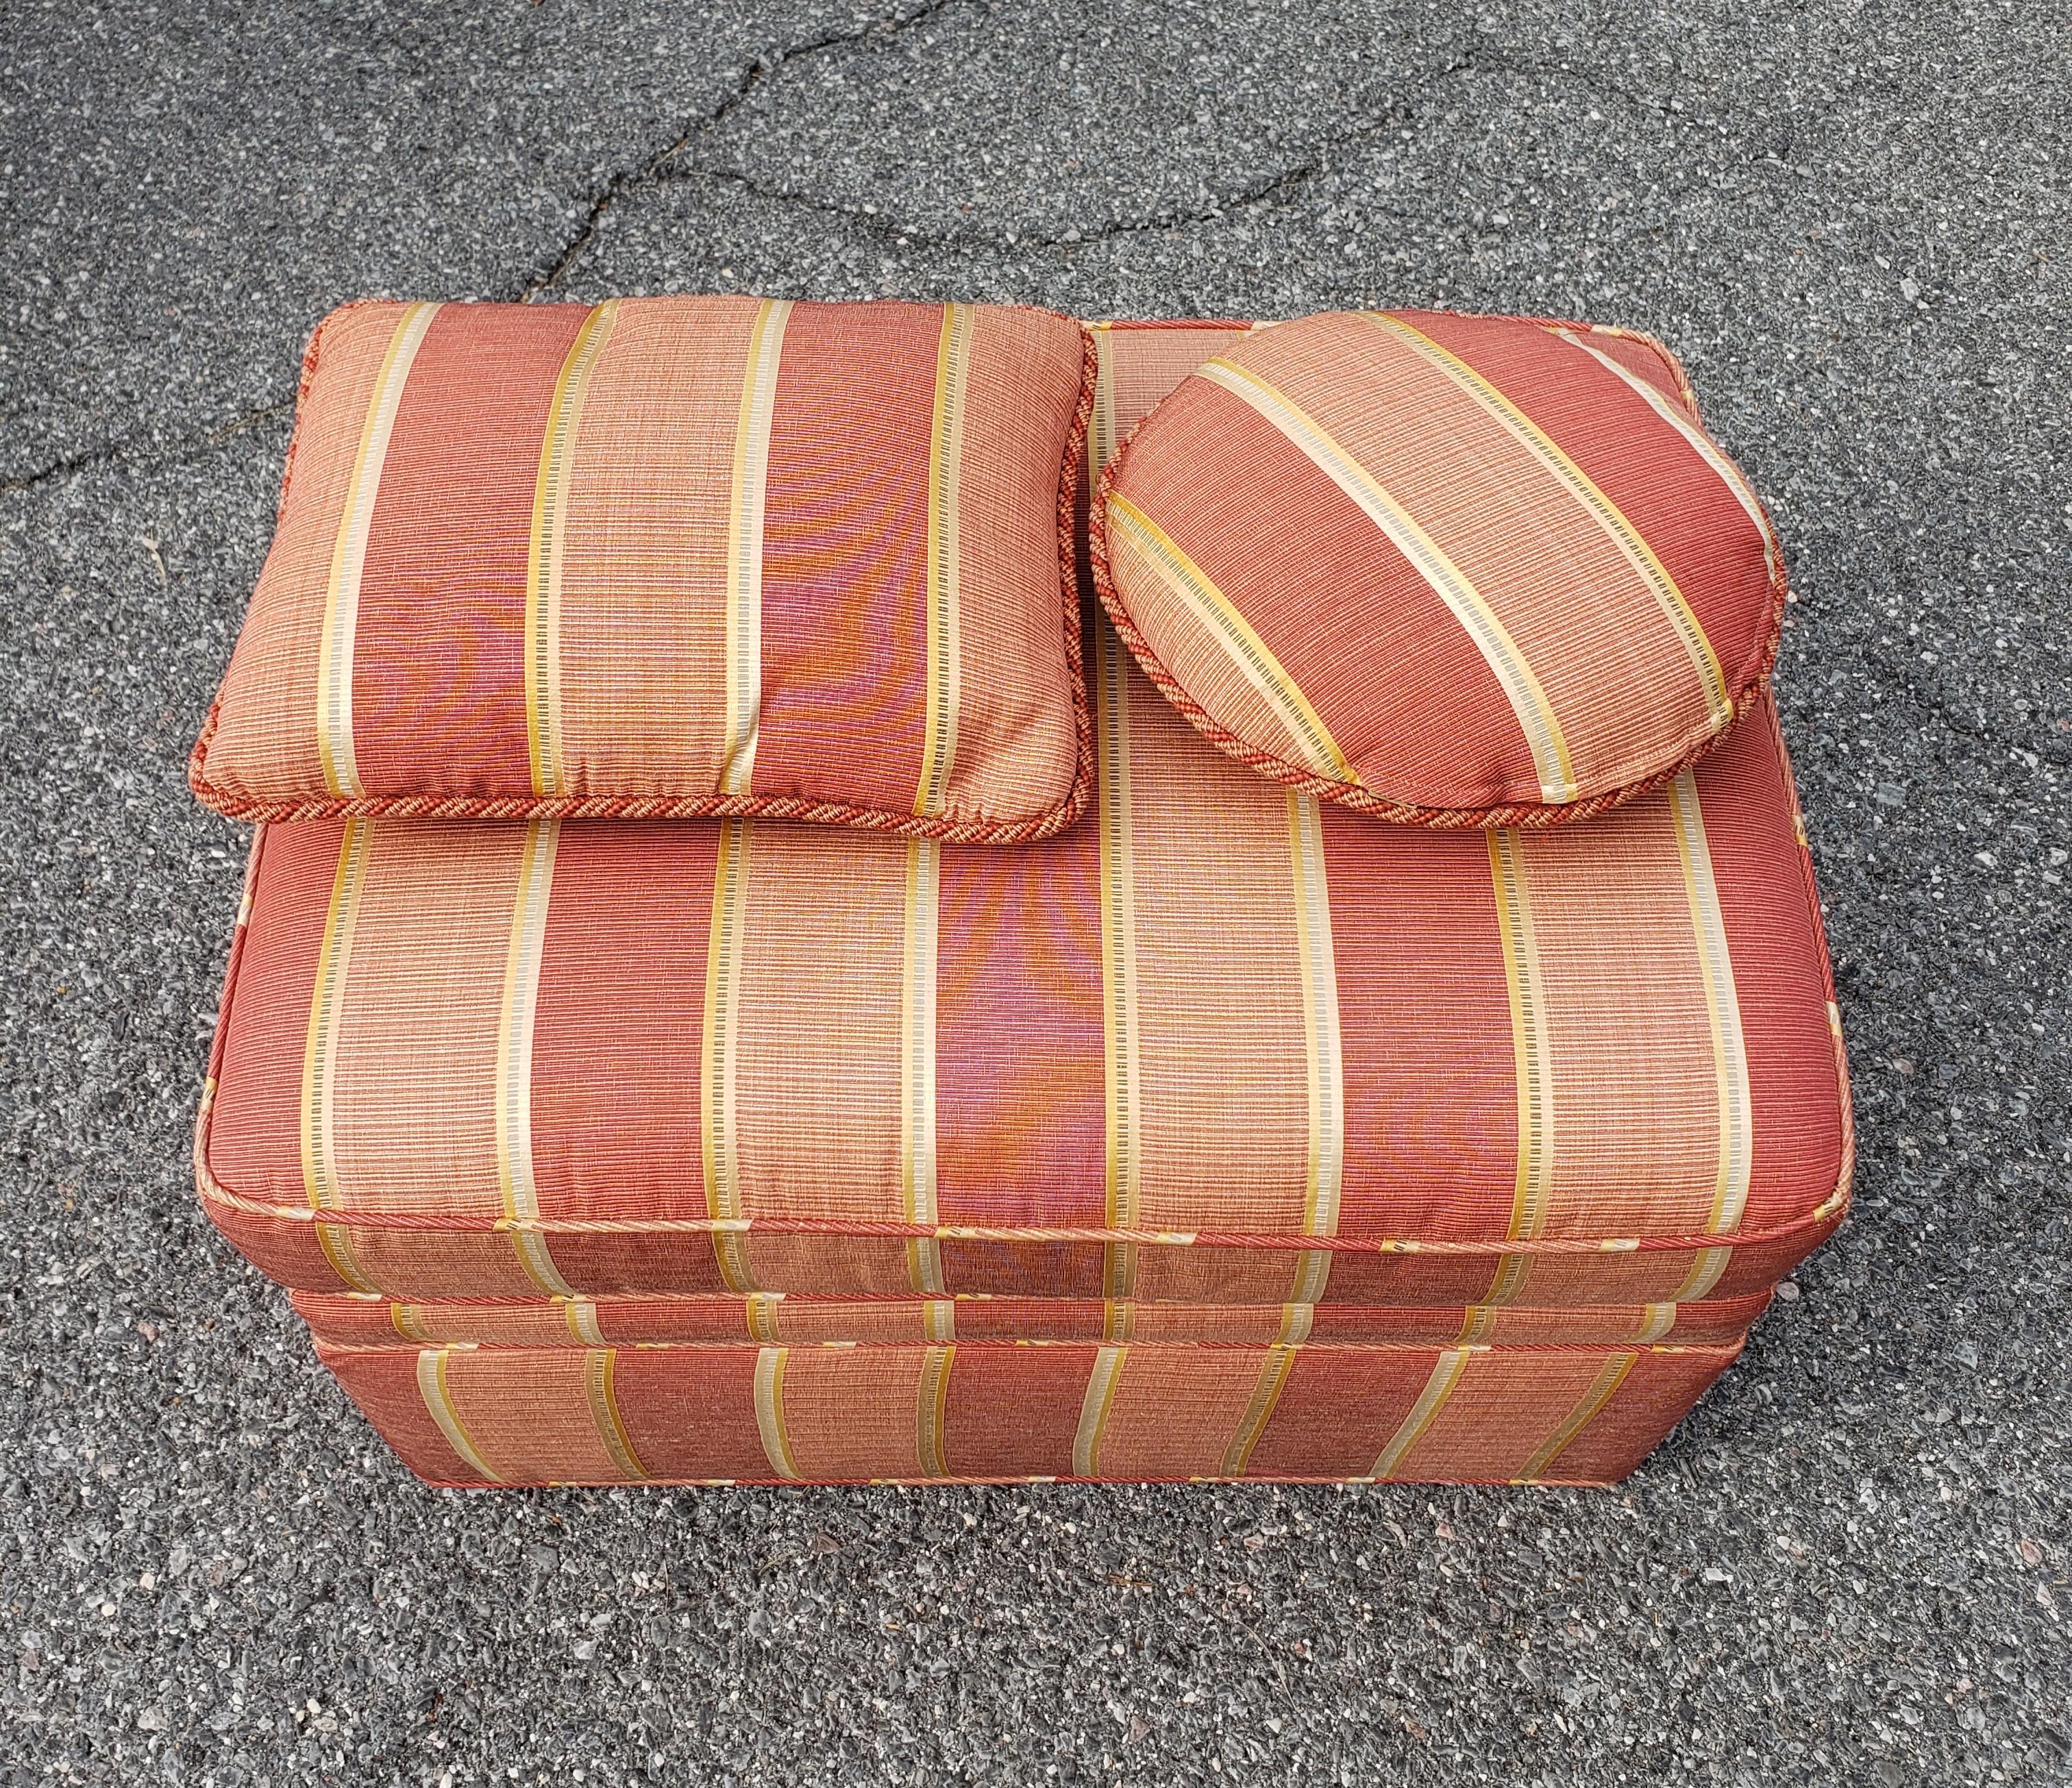 Modern upholstered rolling Ottoman with two matching decorative pillows. Measures 29